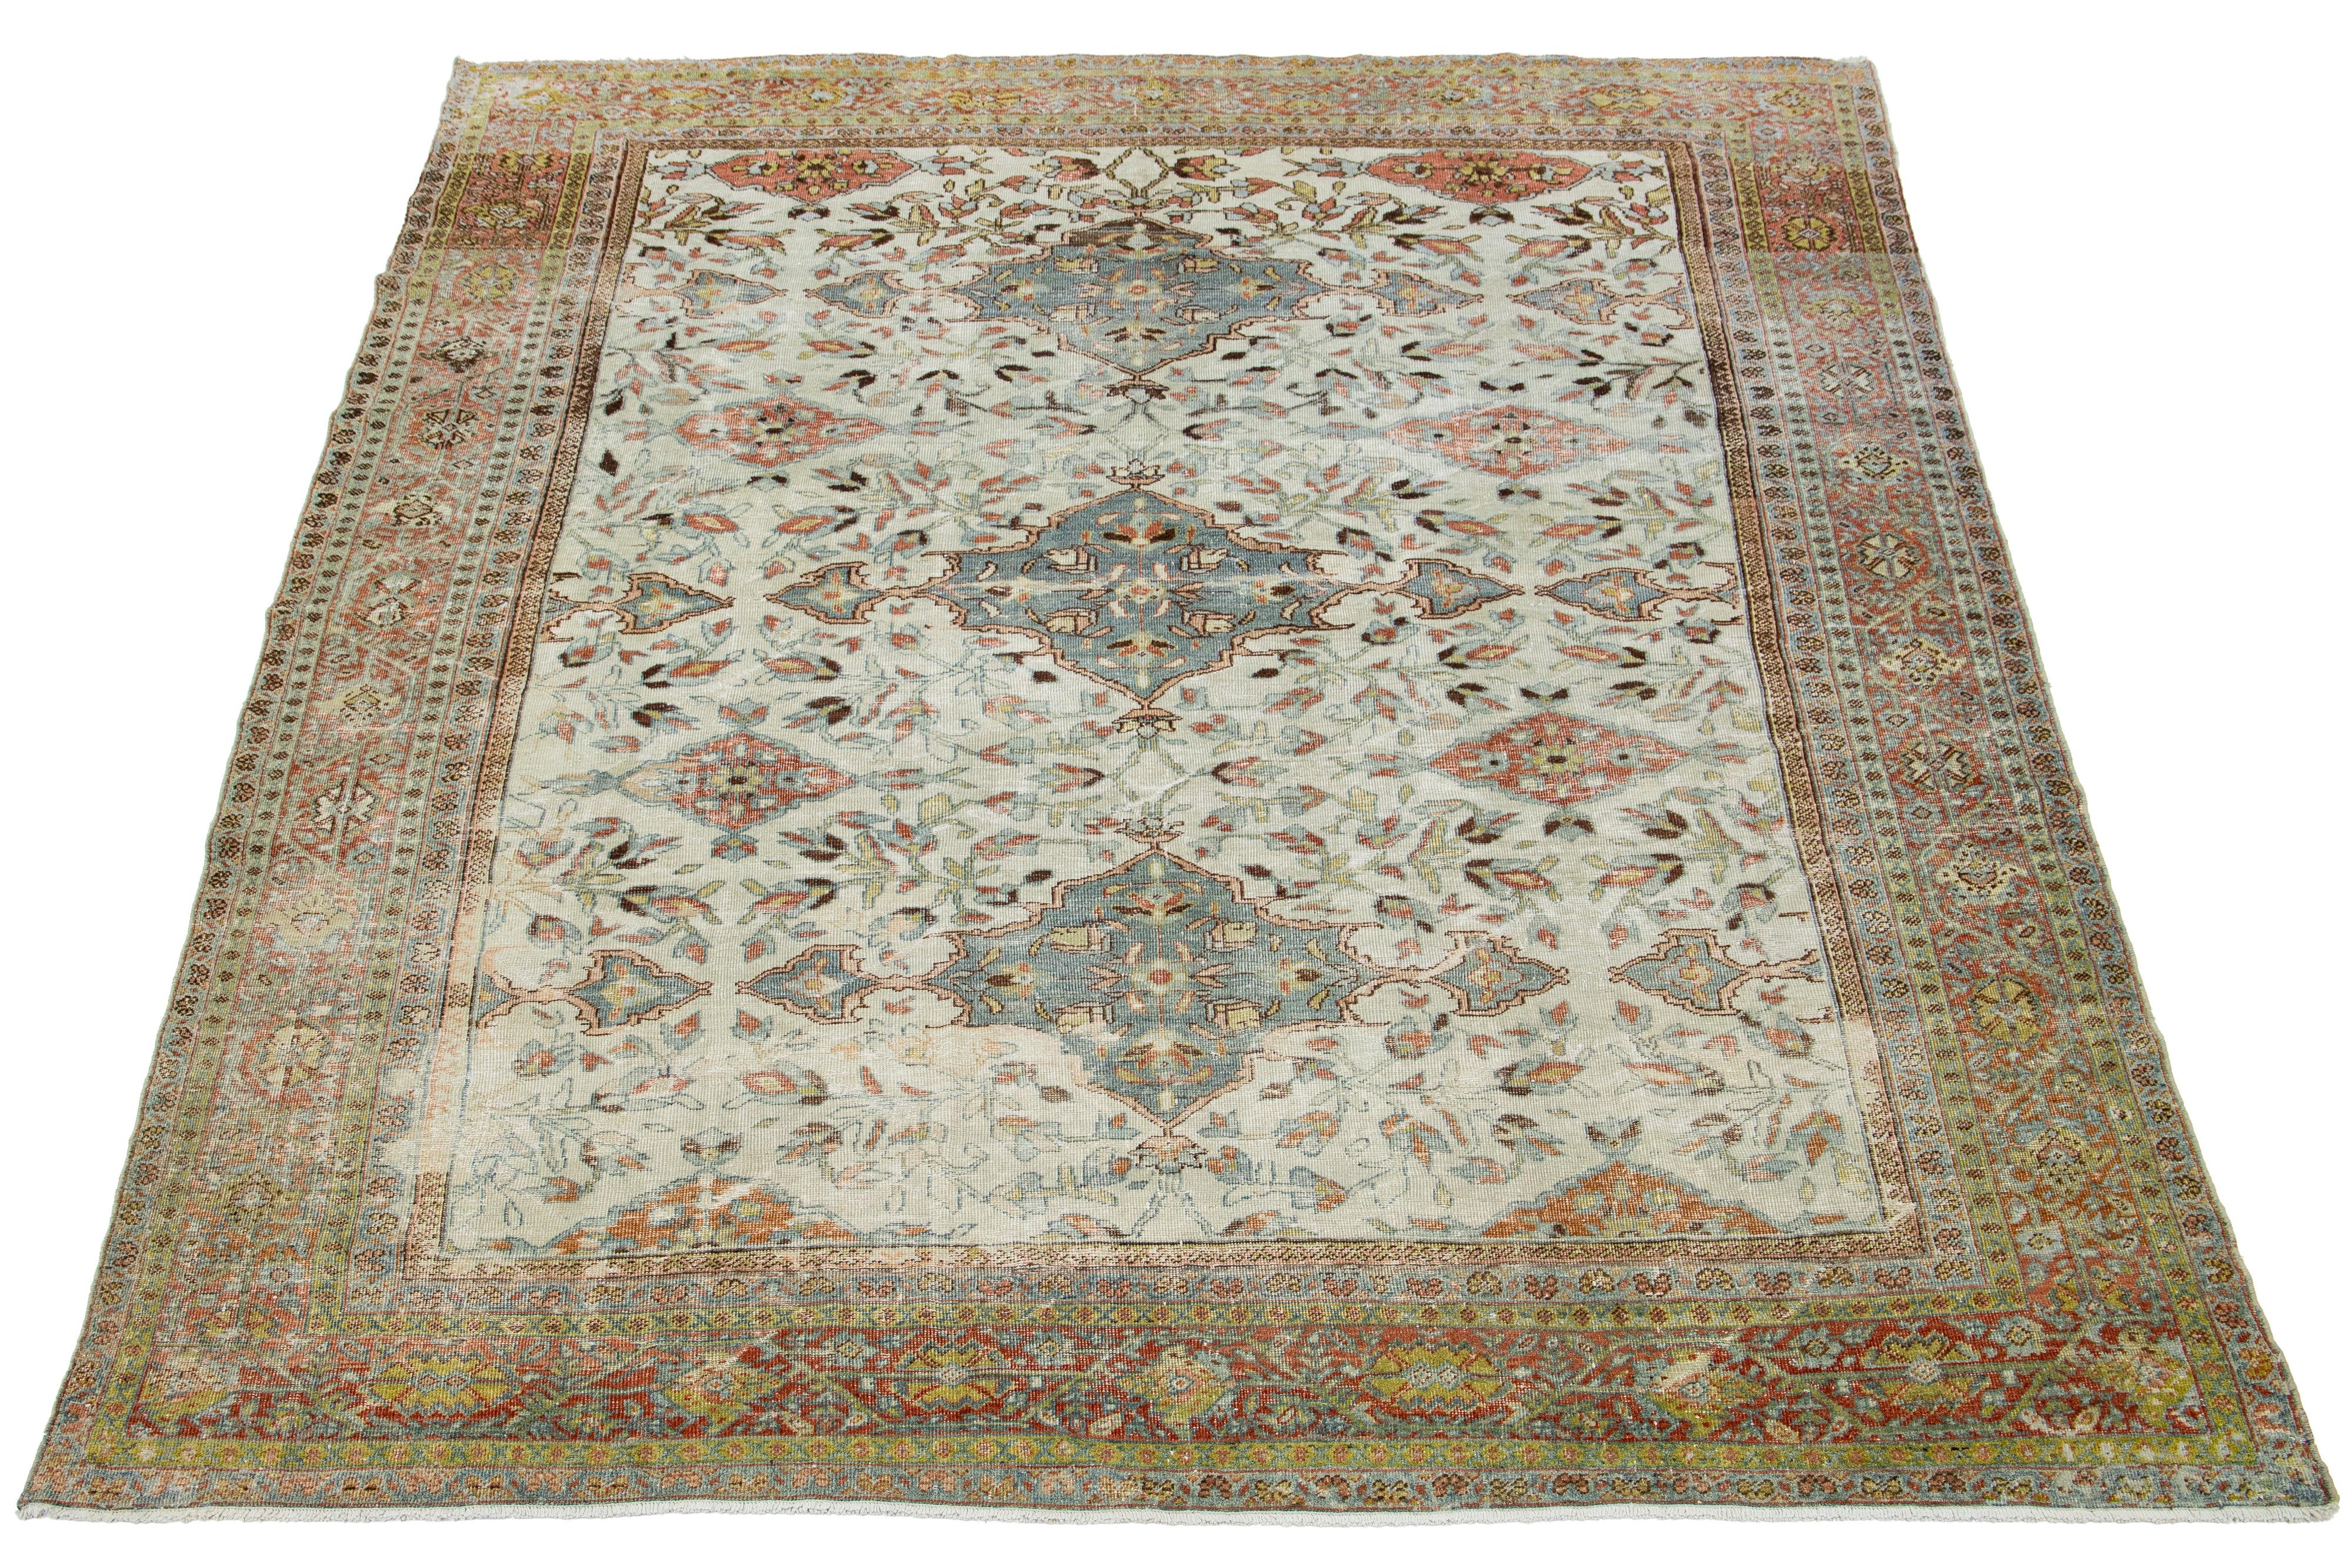 This is a beautiful Antique Mahal hand-knotted wool rug with a beige-colored field. The floral motif of this Persian rug is adorned with green, rust, and brown hues.

This rug measures 9' x 11'6